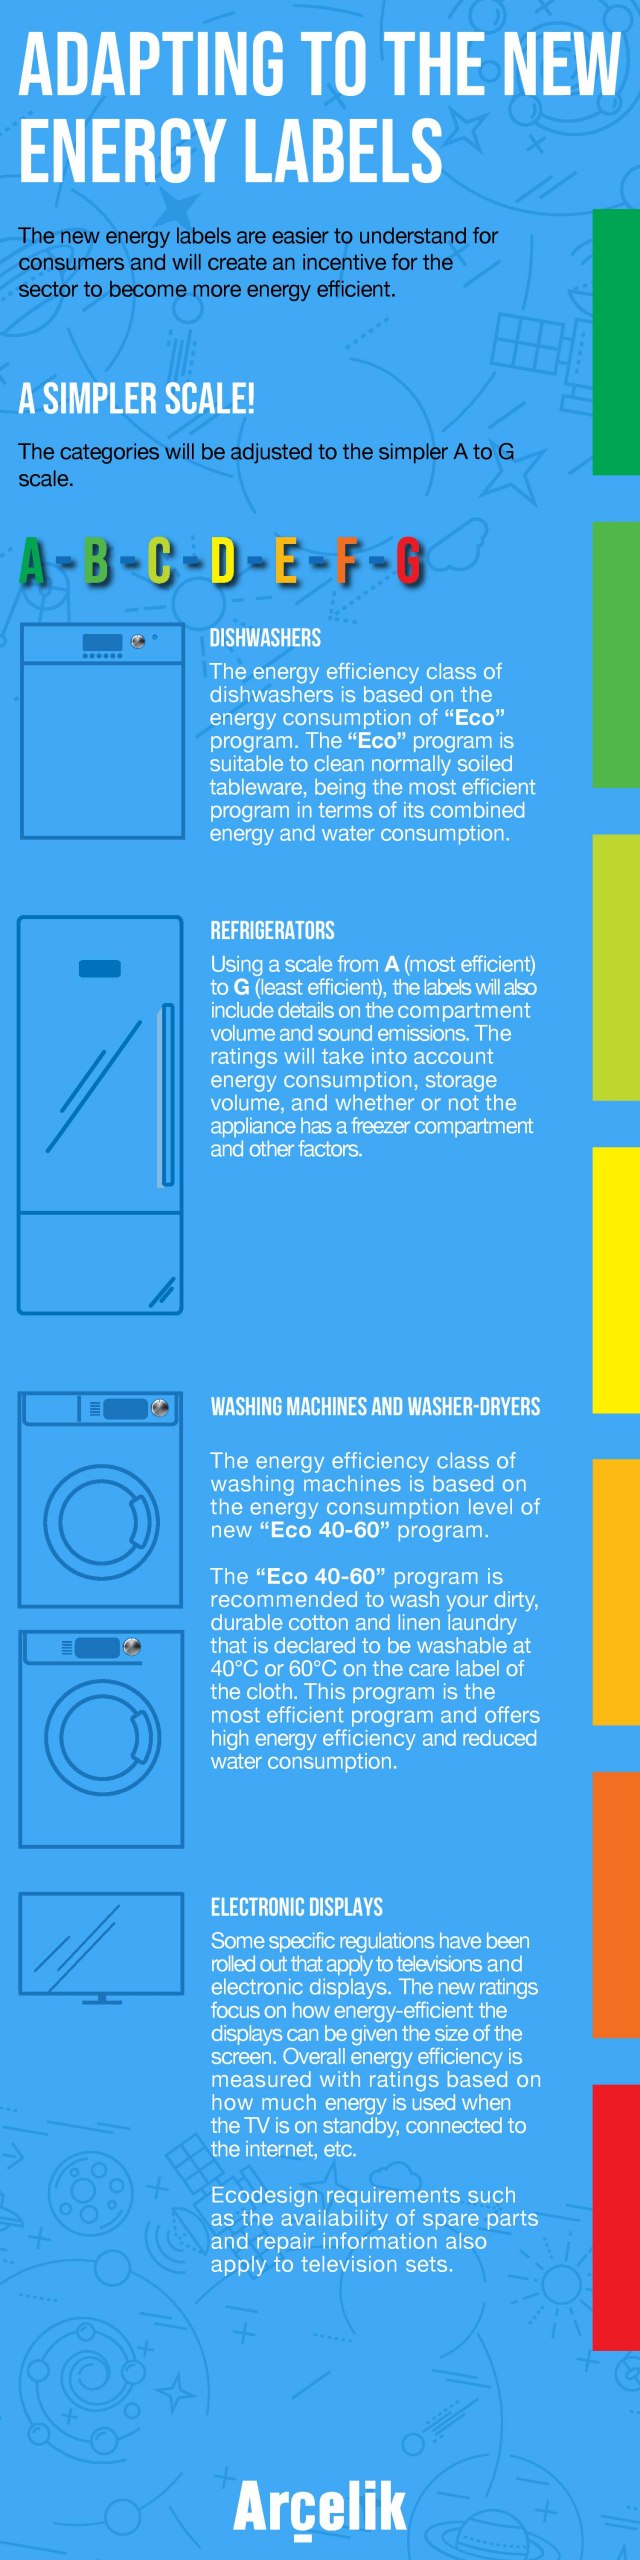 New Energy Labels Infographic